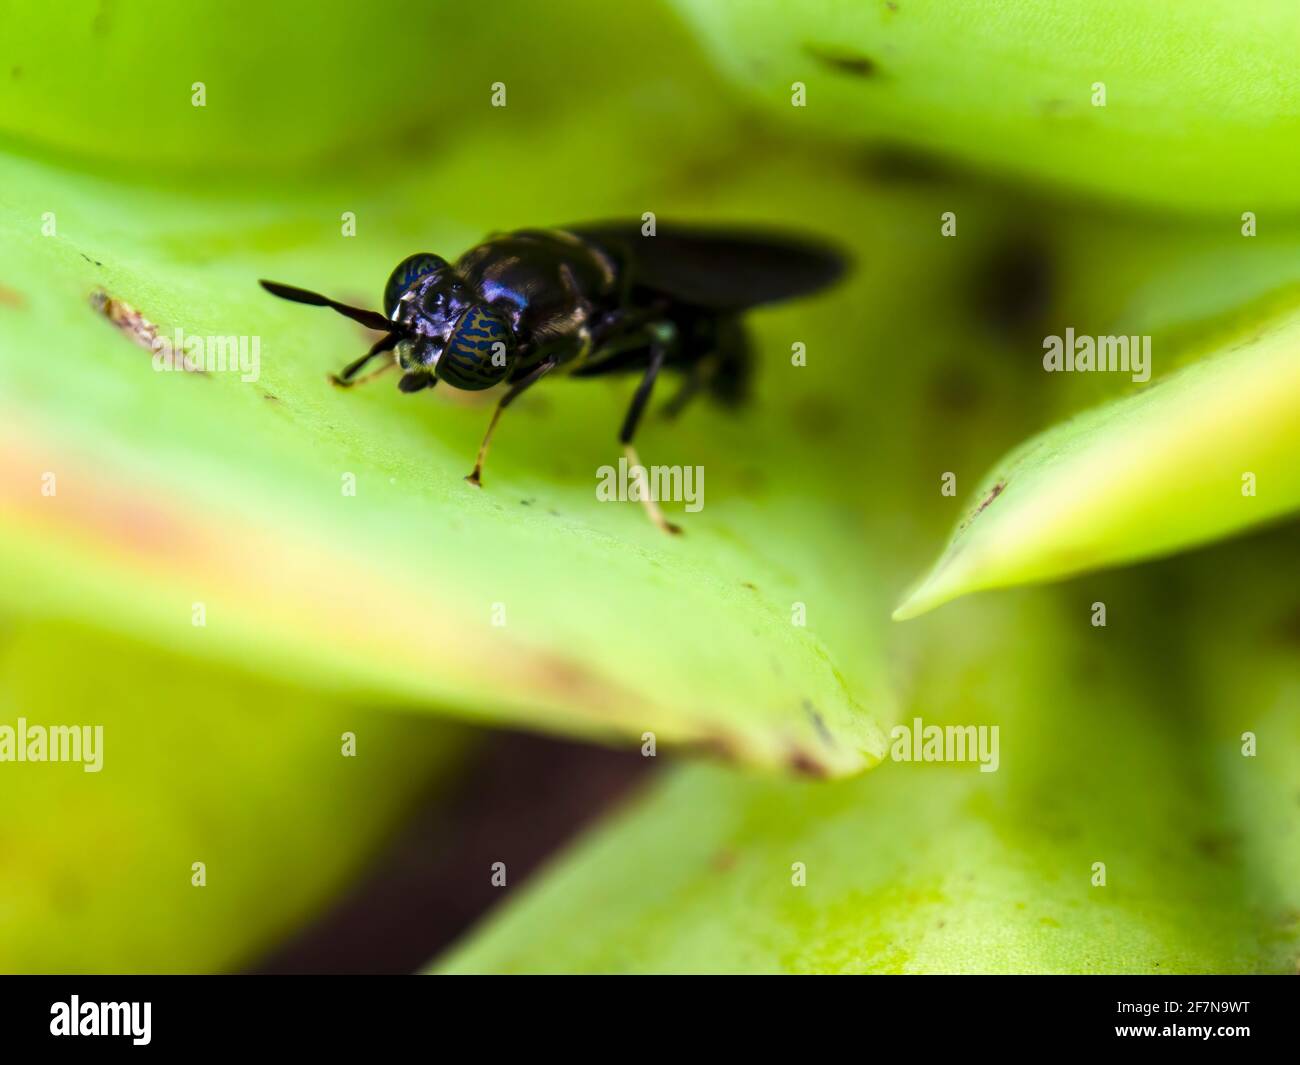 Macro photography of a black soldier fly standing on a succulent plant leaf, captured at a garden near the colonial town of Villa de Leyva, Colombia. Stock Photo